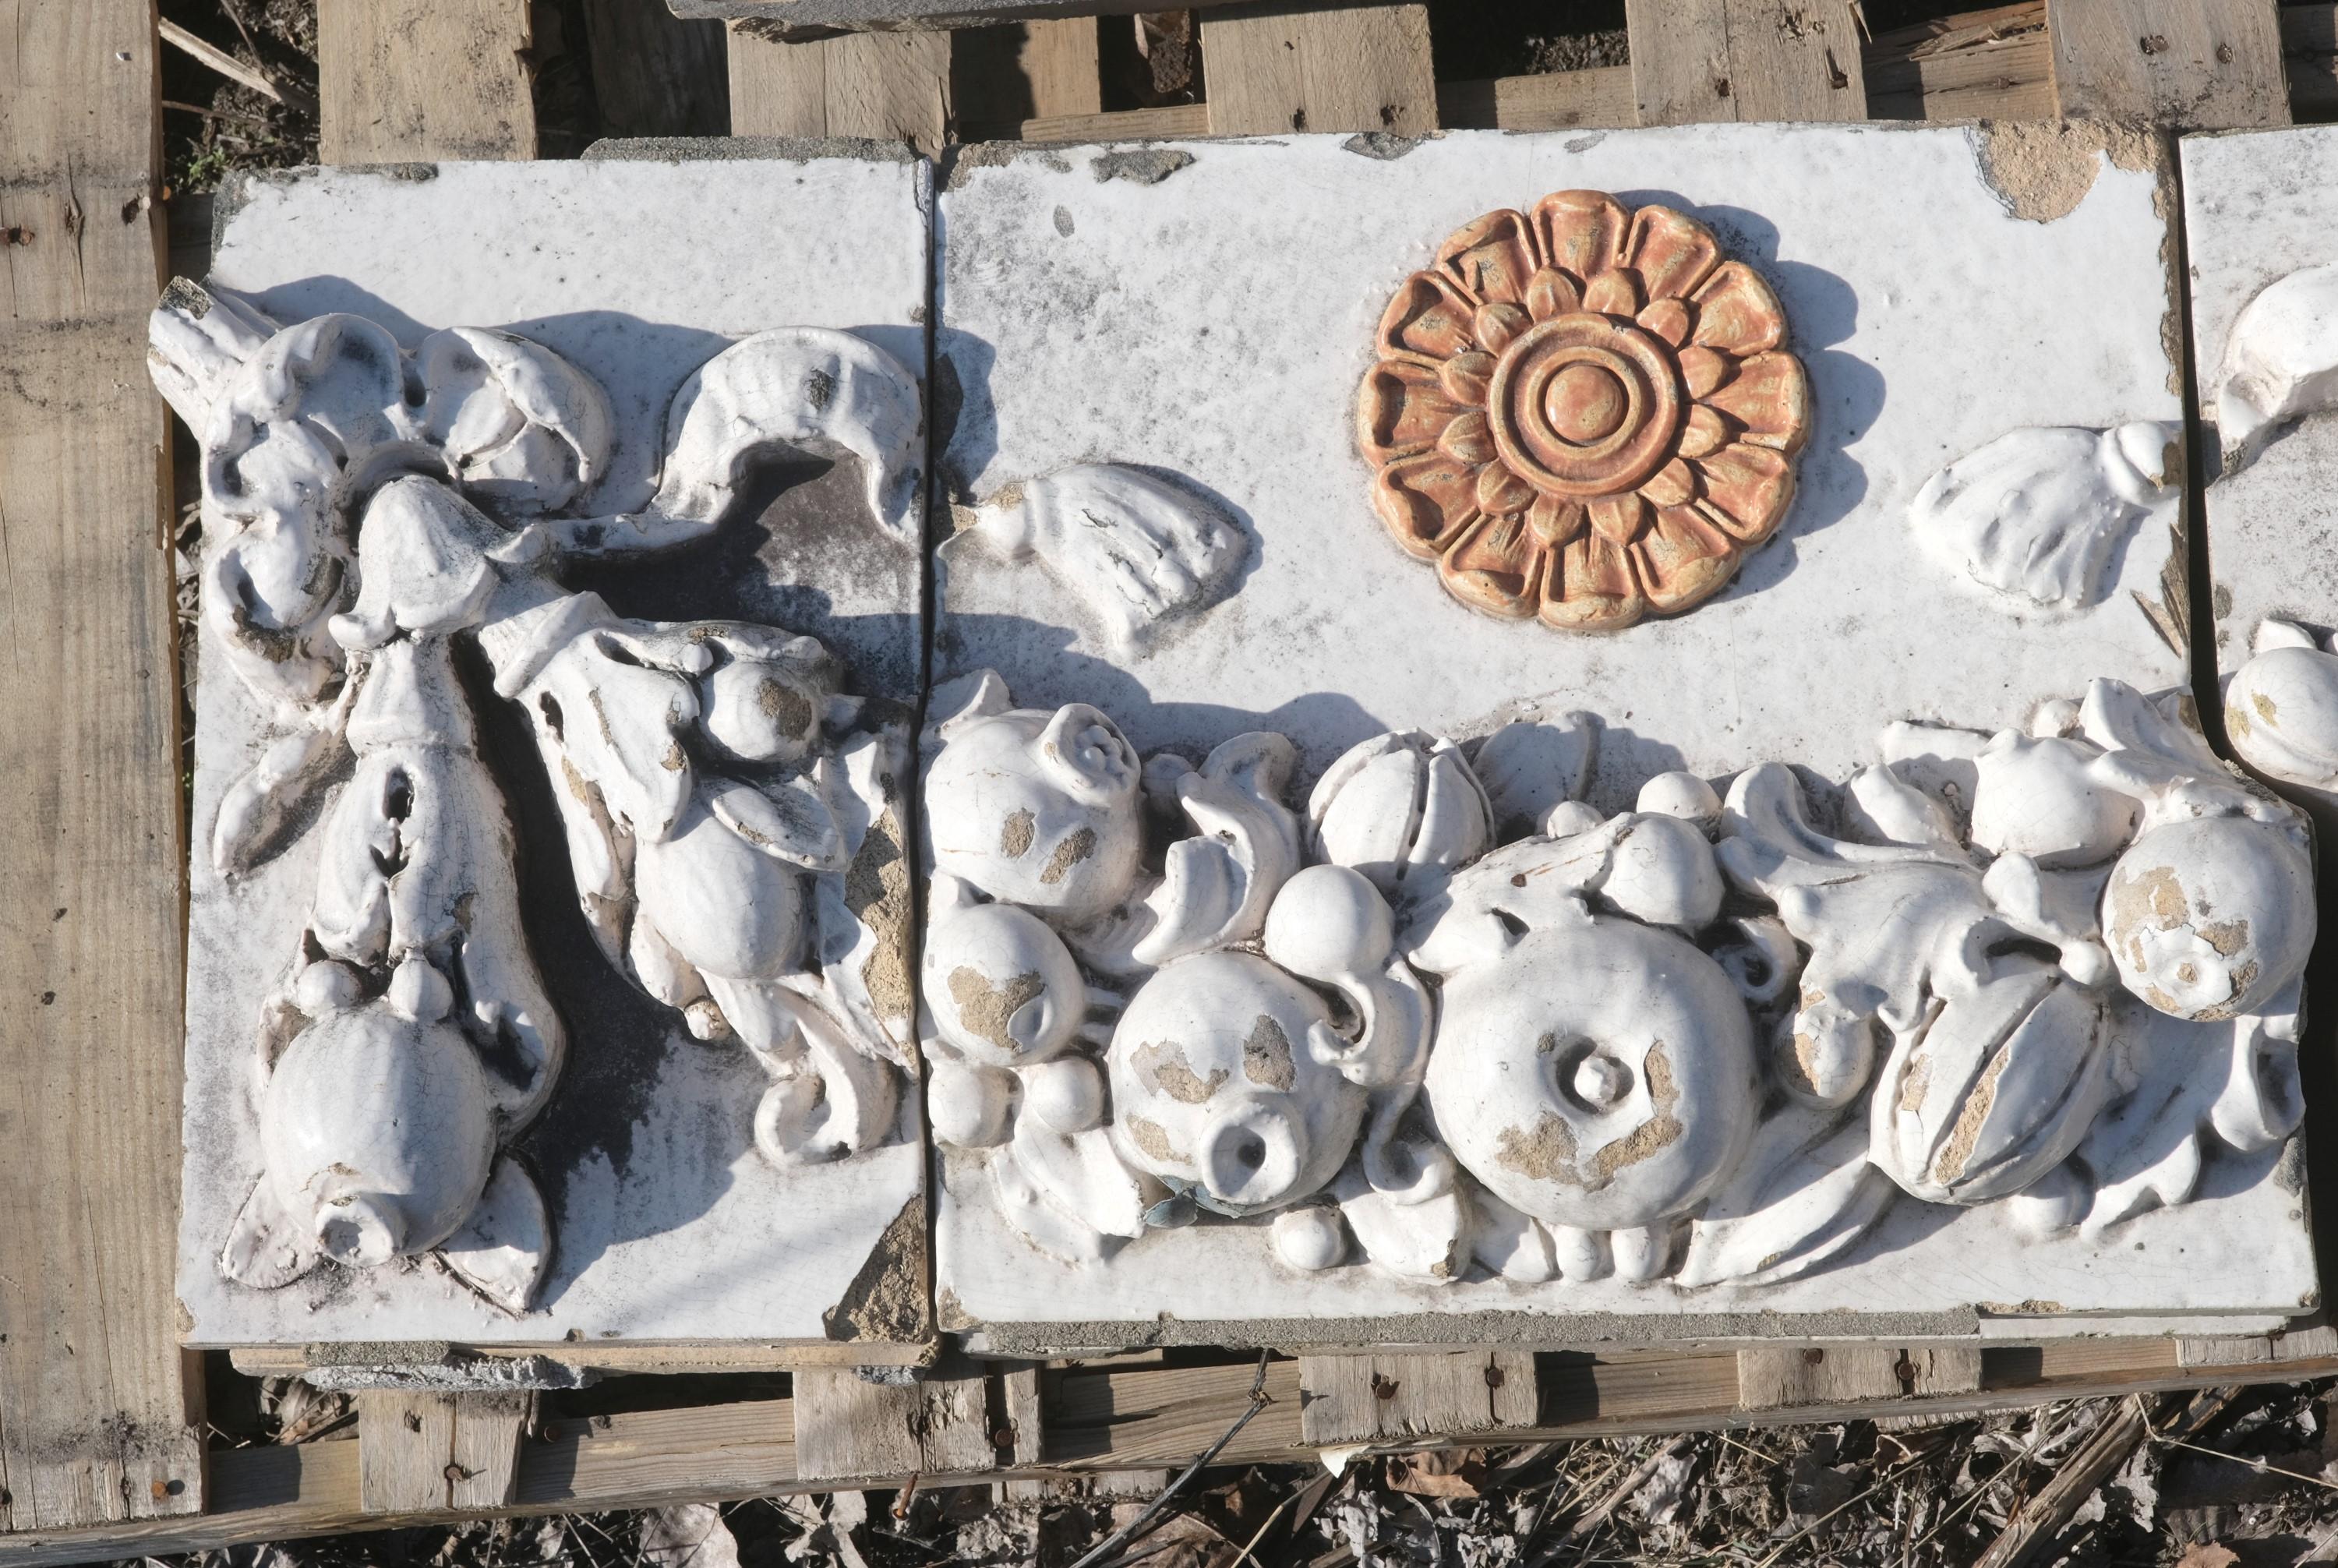 Antique reclaimed white terra cotta frieze made up into three pieces with cornucopia, festoons, and a central orange flower. This is in good condition, with some chips. Please see the photos. Please note, this item is located in our Scranton, PA